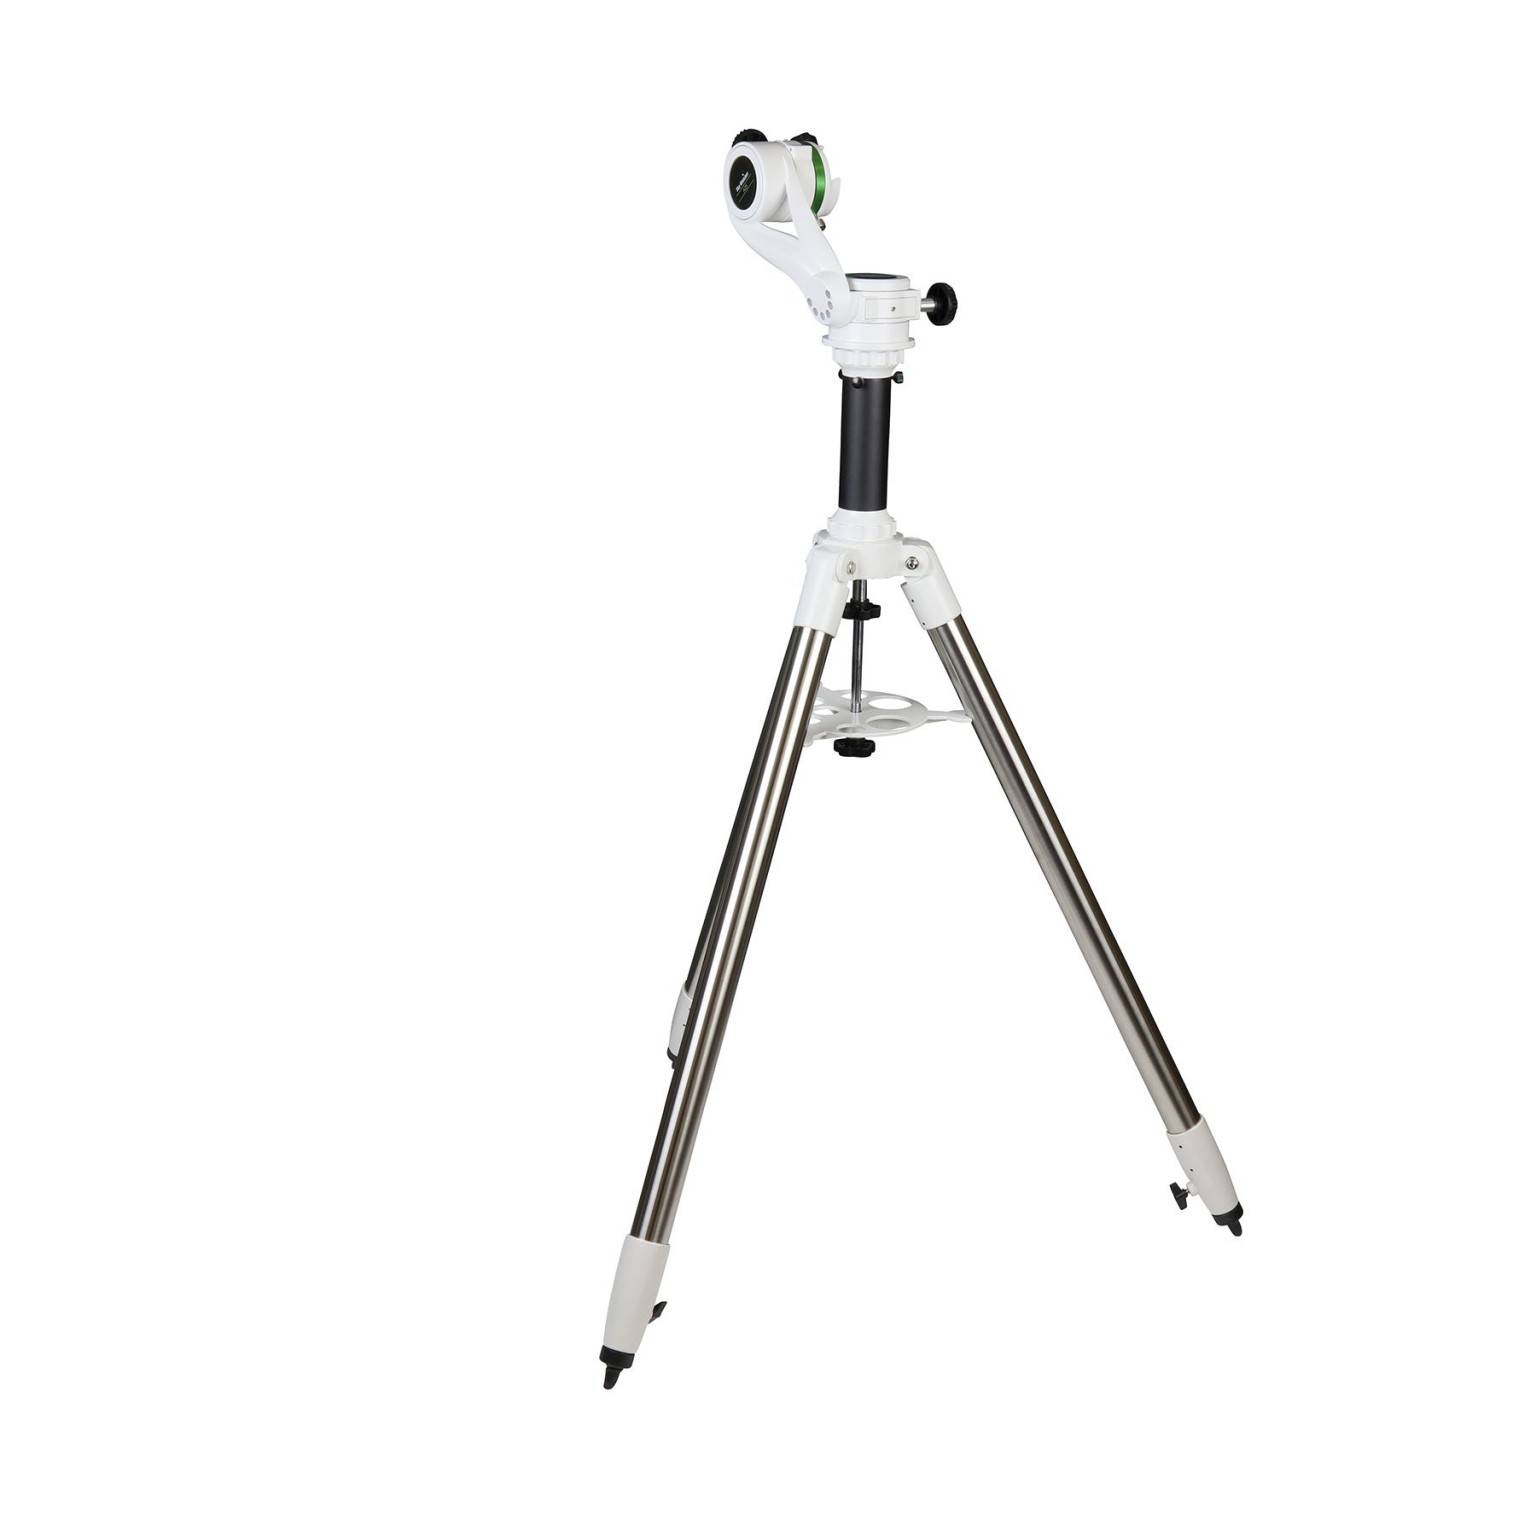 Sky-Watcher AZ5 mount with pier extsnsion & stainless steel tripod